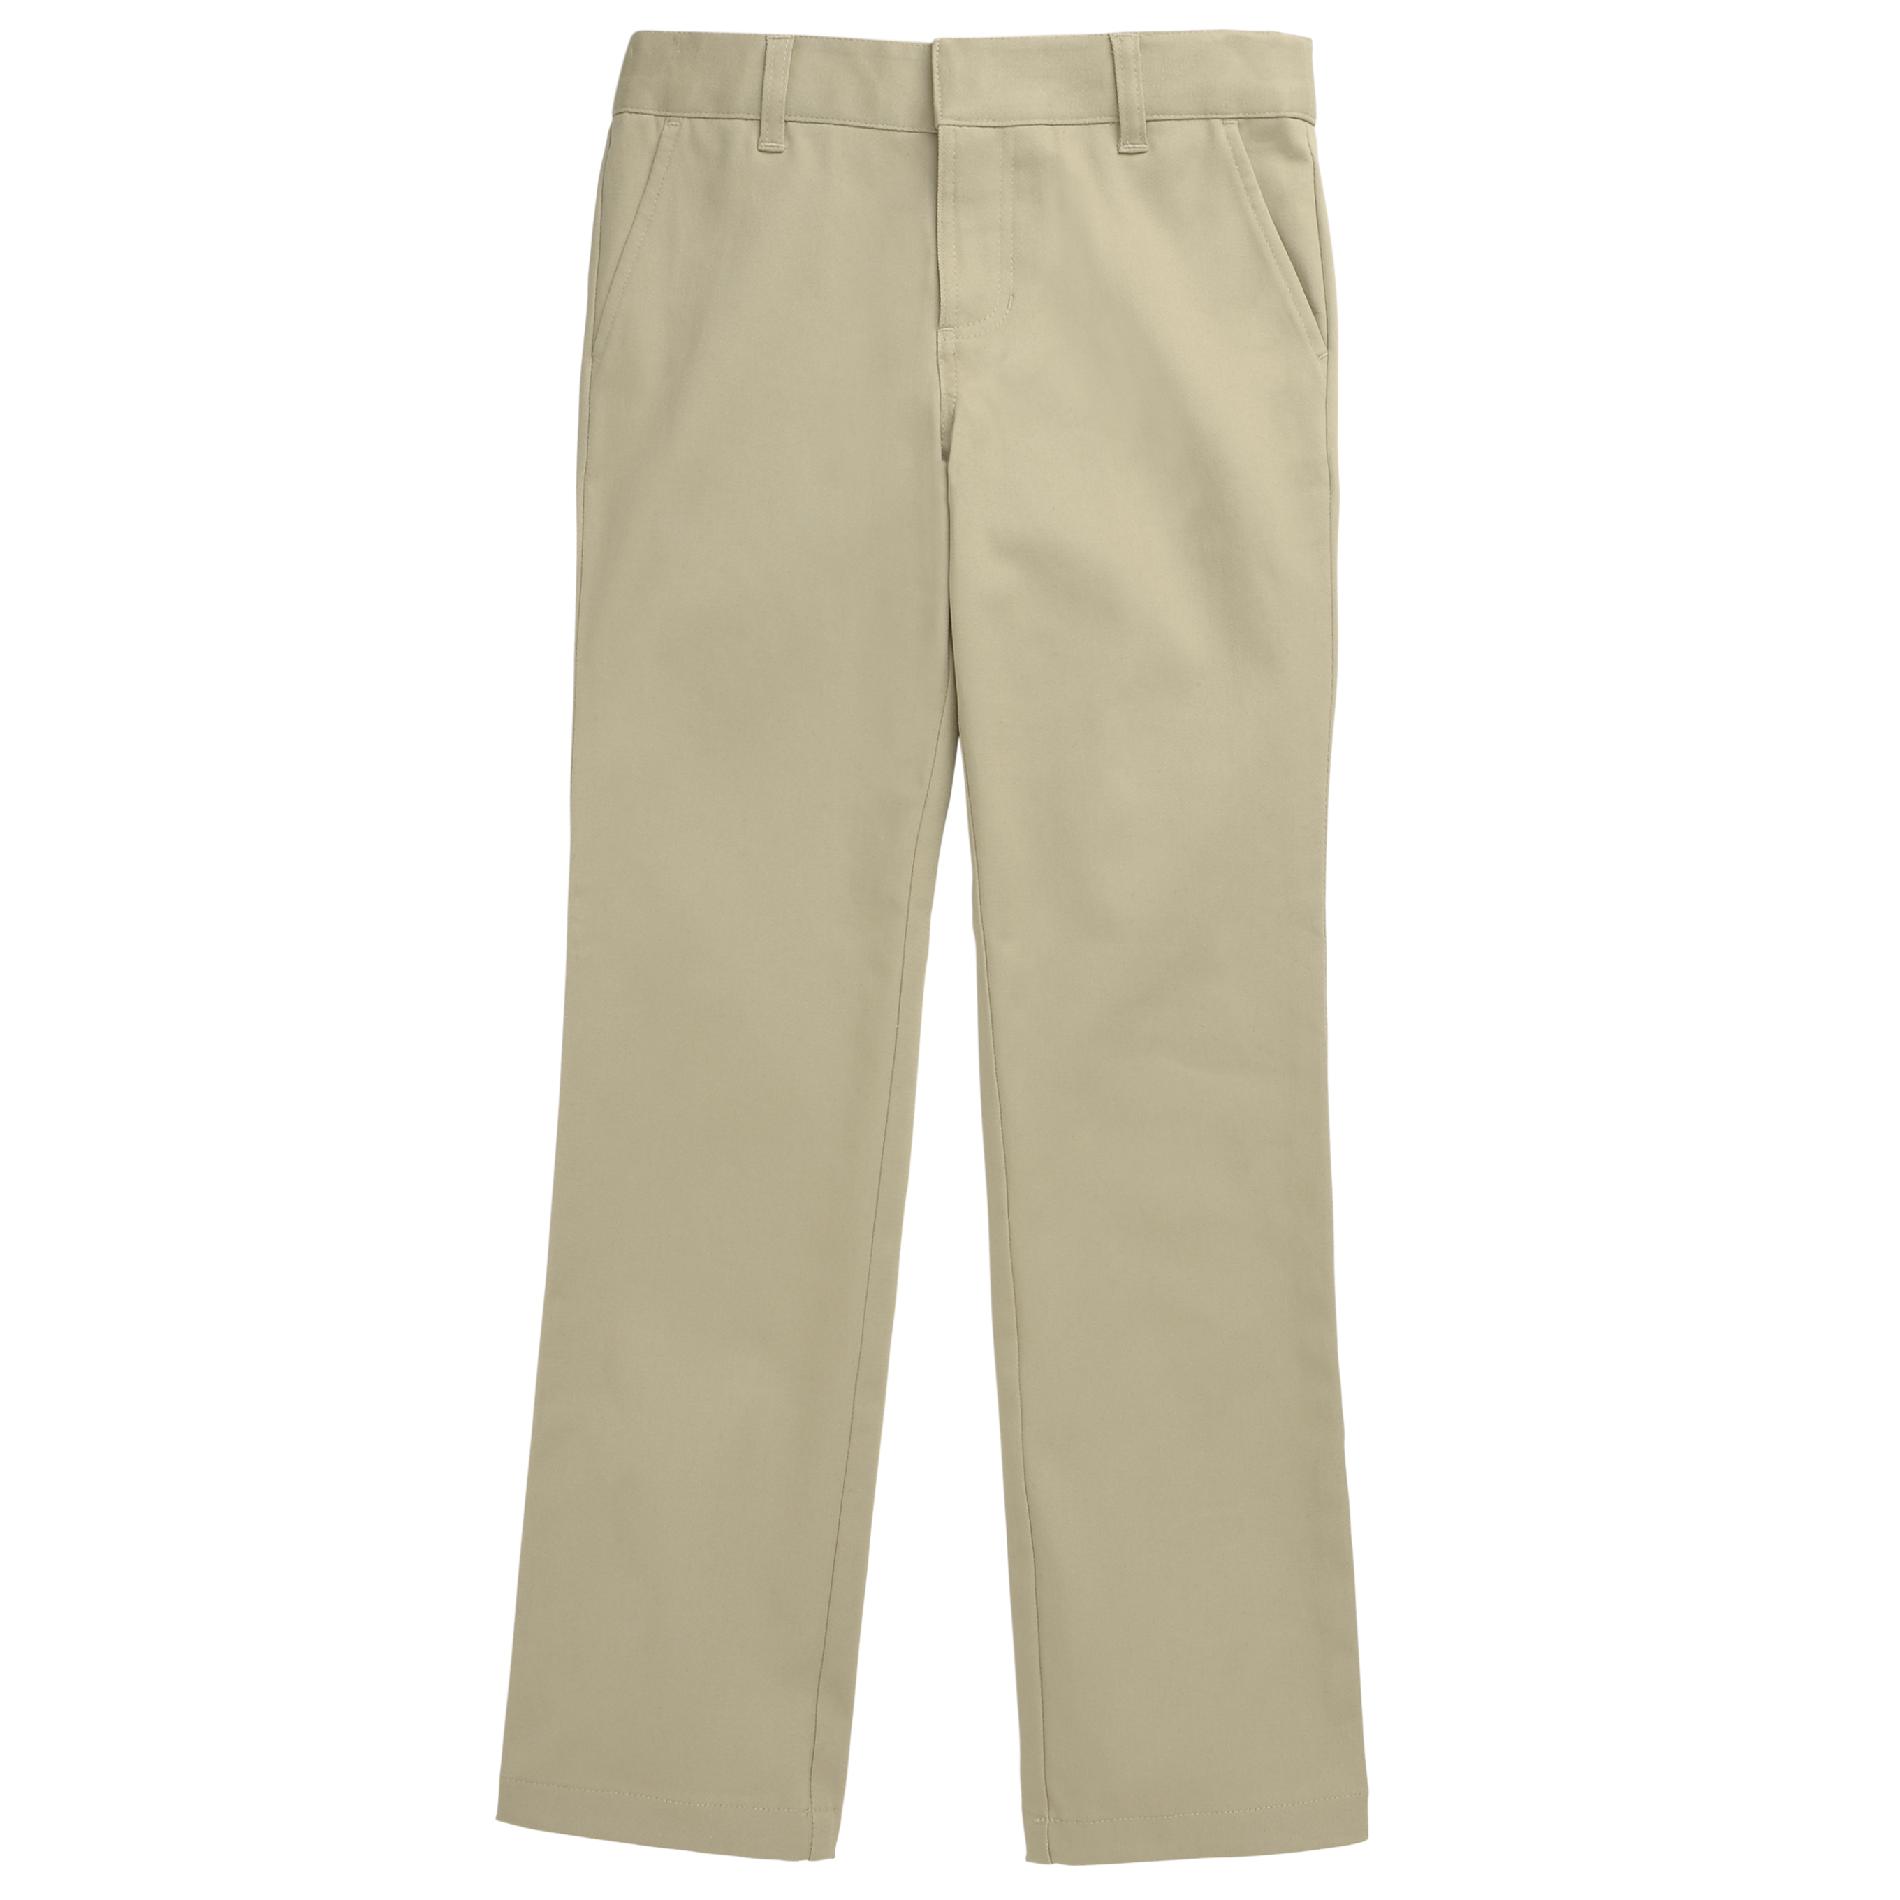 At School by French Toast Girls 16-20 Stretch Straight Leg Pant